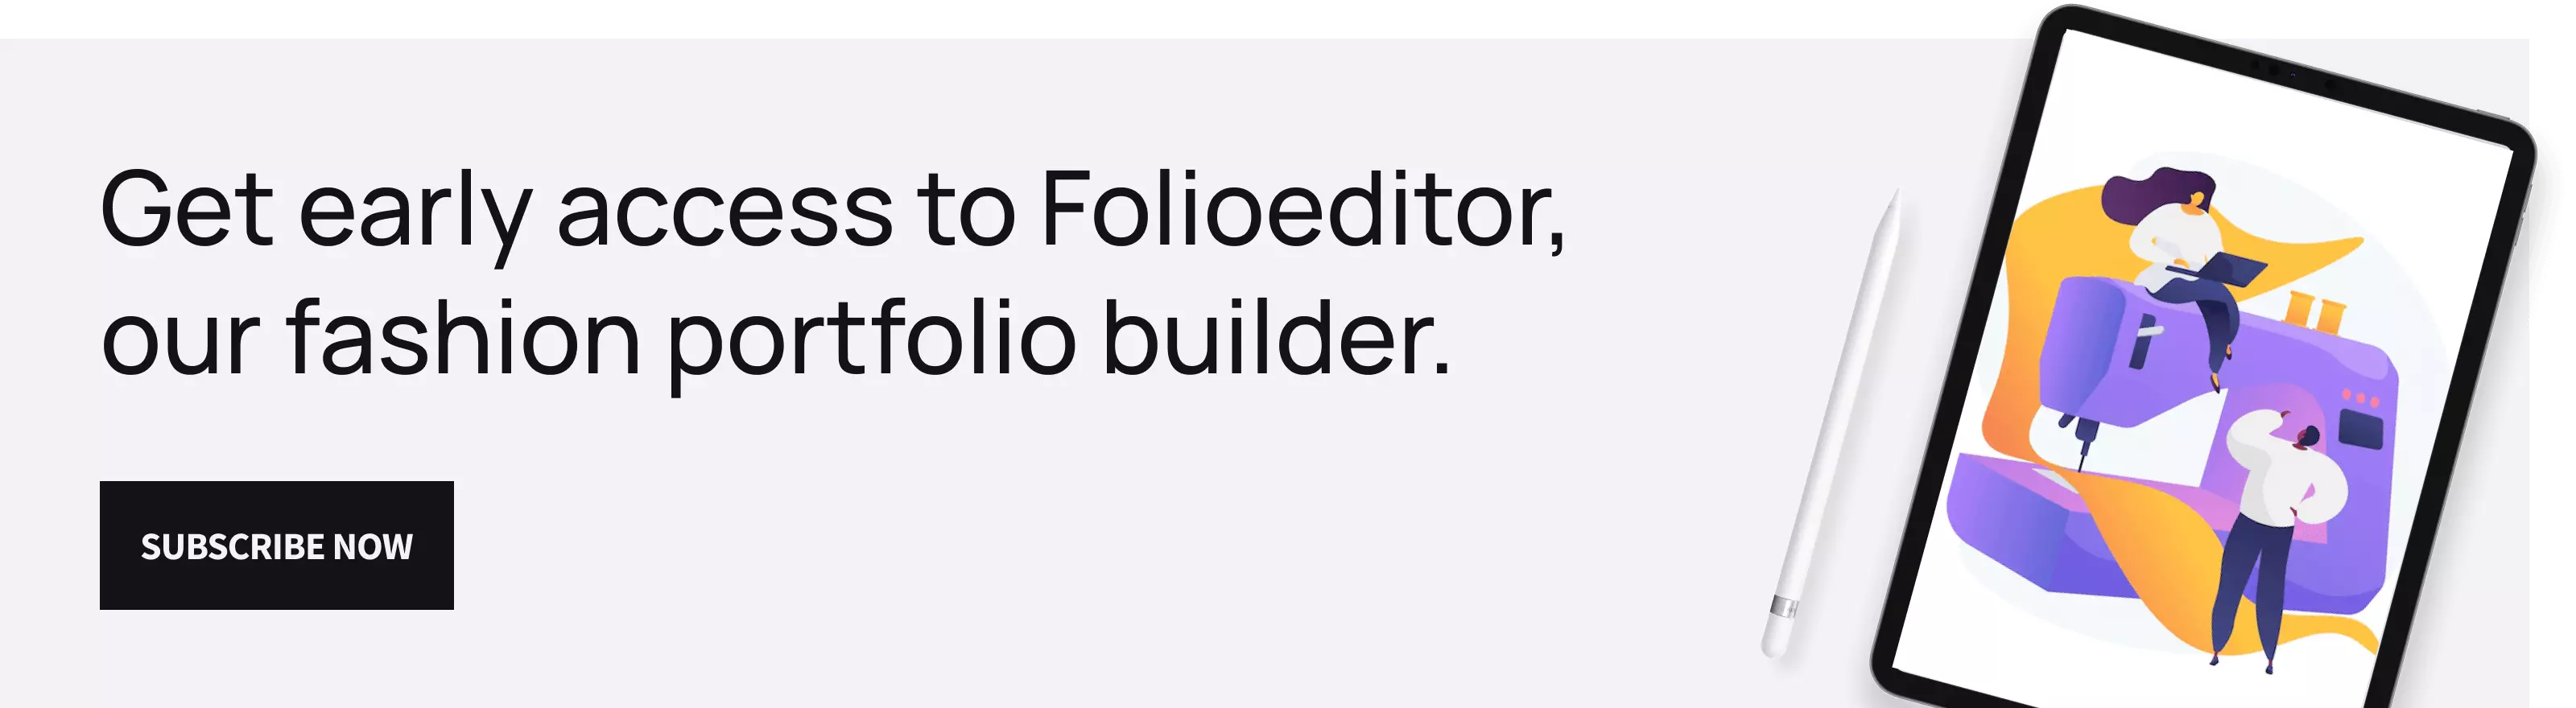 Get early access to Folioeditor, our fashion portfolio builder